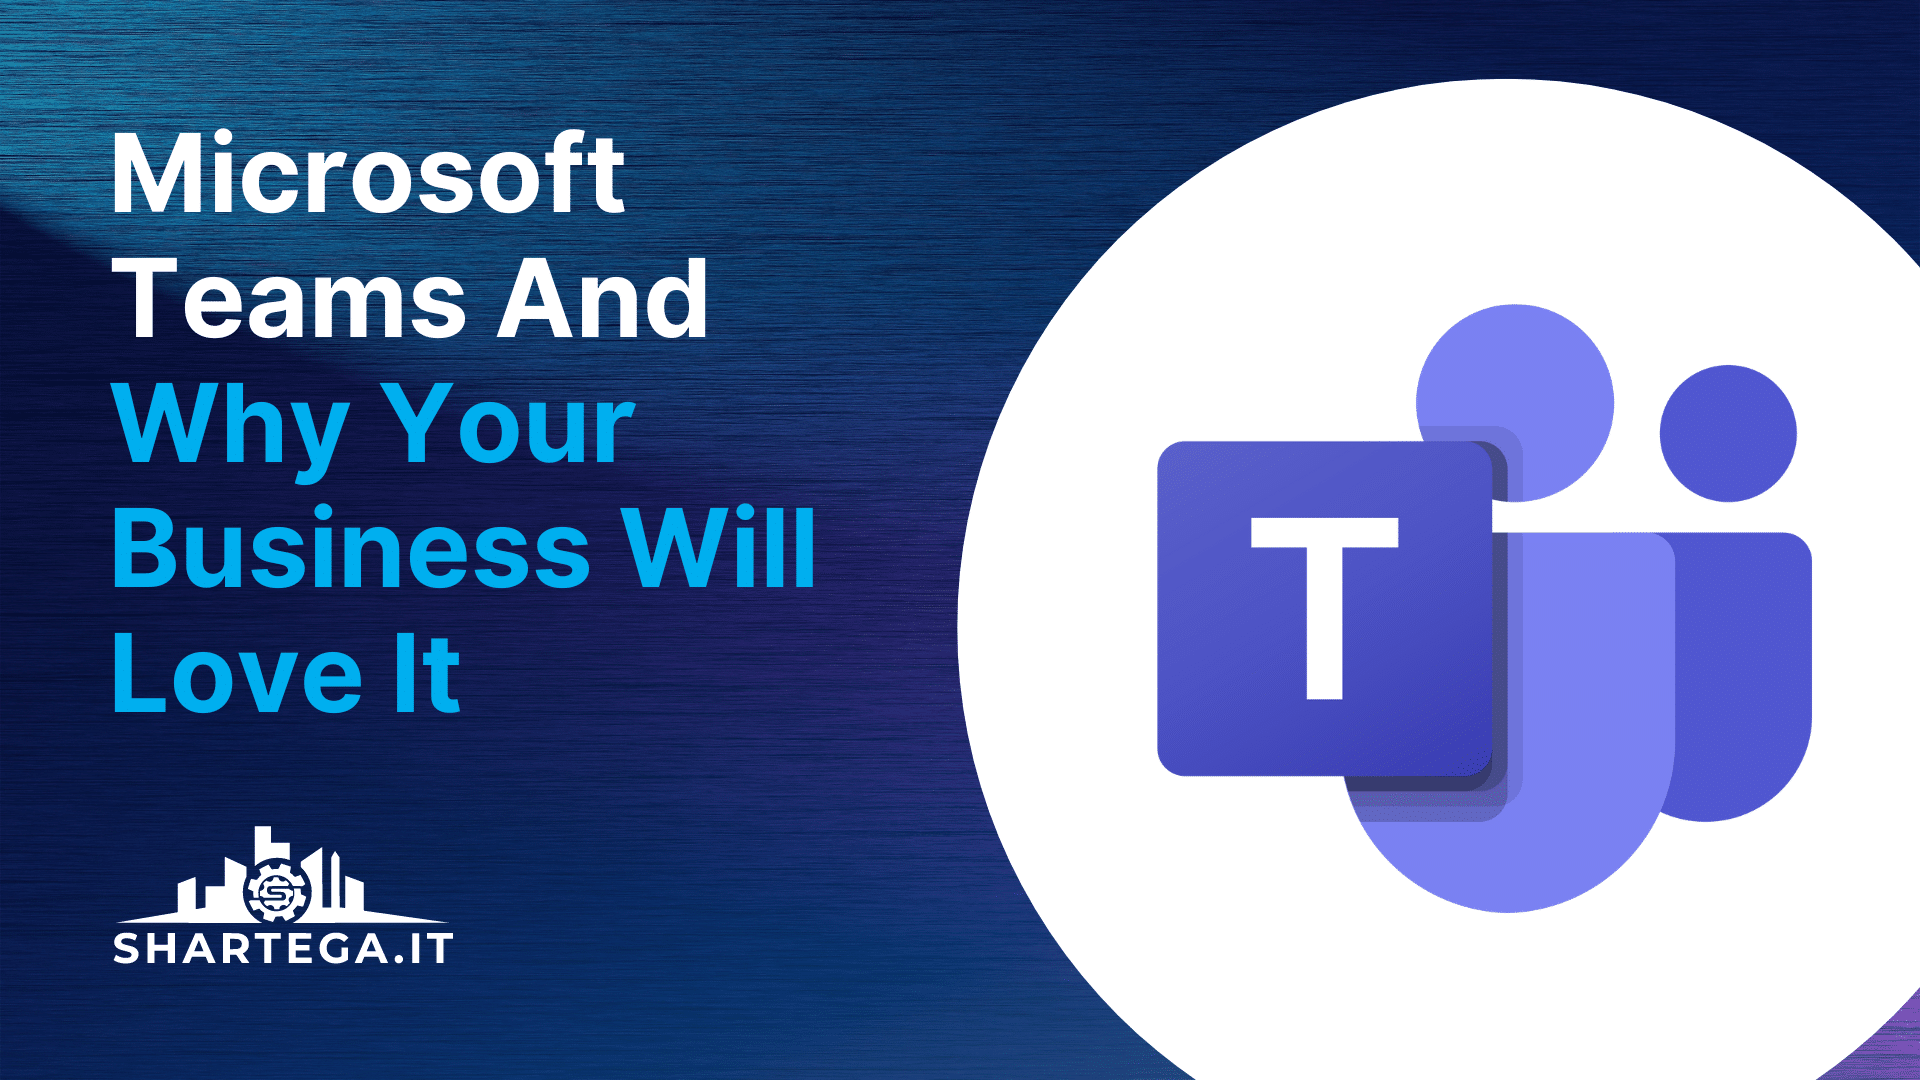 Microsoft Teams and Why Your Business Will Love It